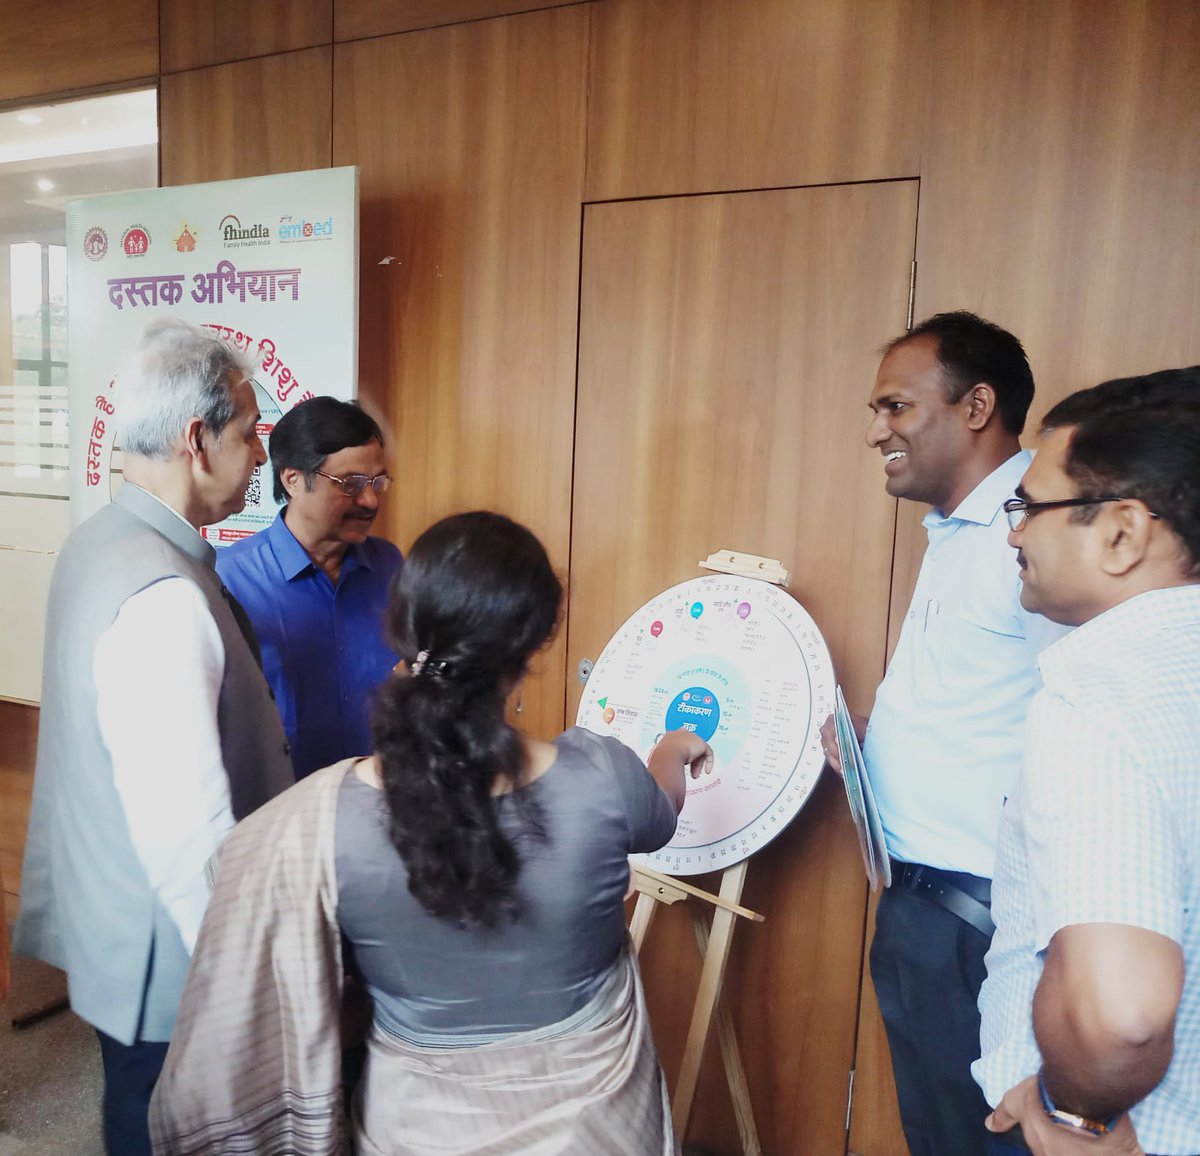 Today, Mr. Sudhansh Pant, the Union Health Secretary, visited the NHM building in Madhya Pradesh and received a briefing on the functionality and purpose of the RI Wheel. The Health Secretary praised the tool's utility and effectiveness. @MoHFW_INDIA @healthminmp @NHM_MP